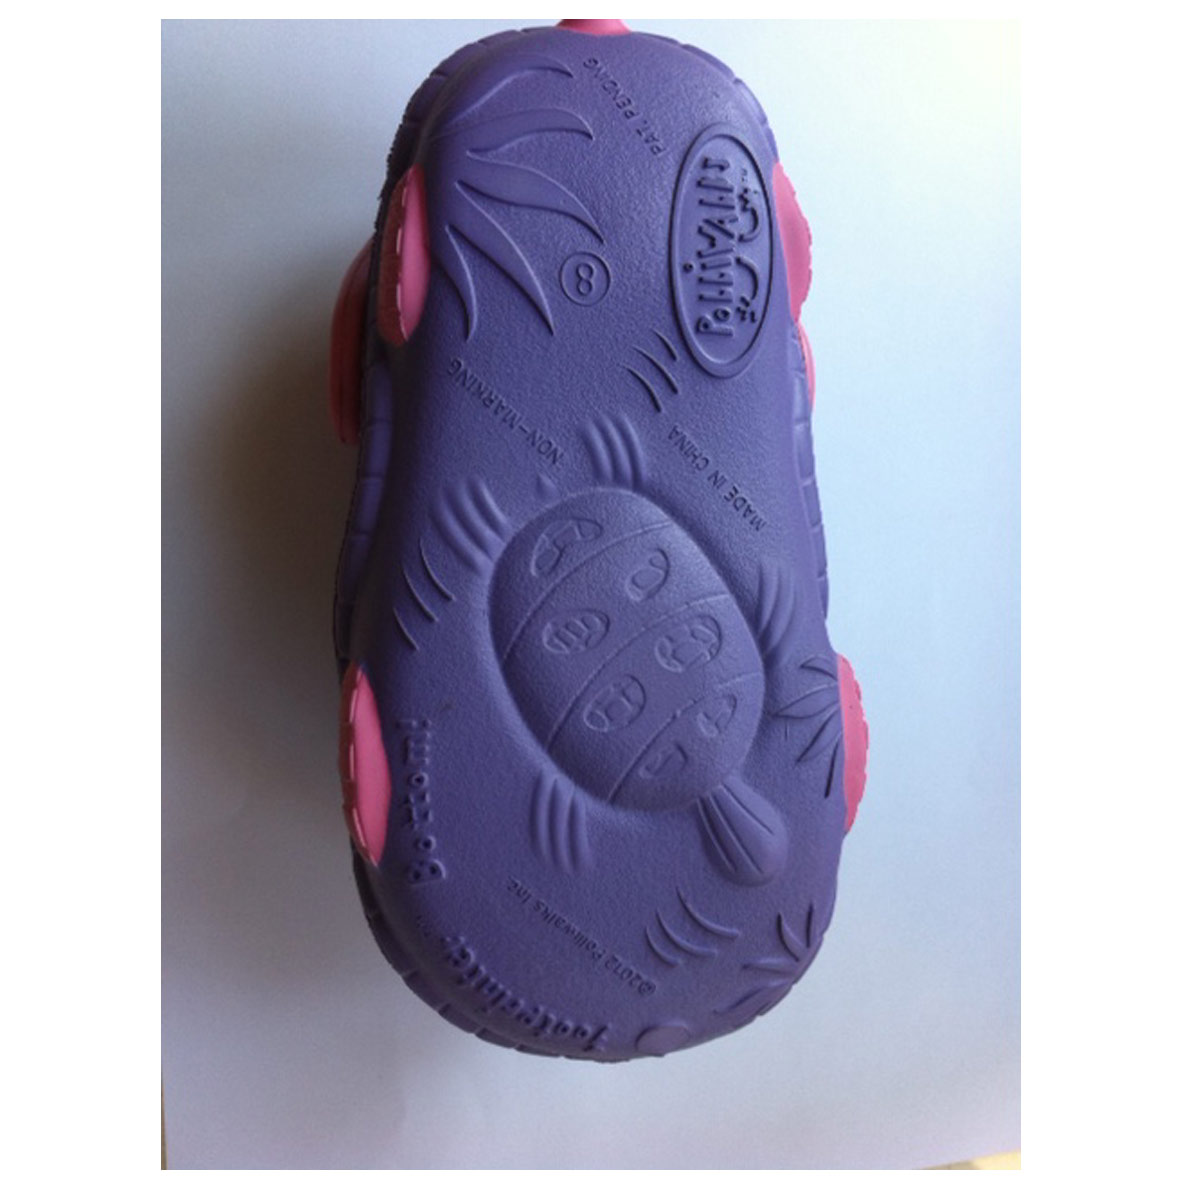 Polliwalks : Toddler shoes Tory  the Turtle  Purple # 8